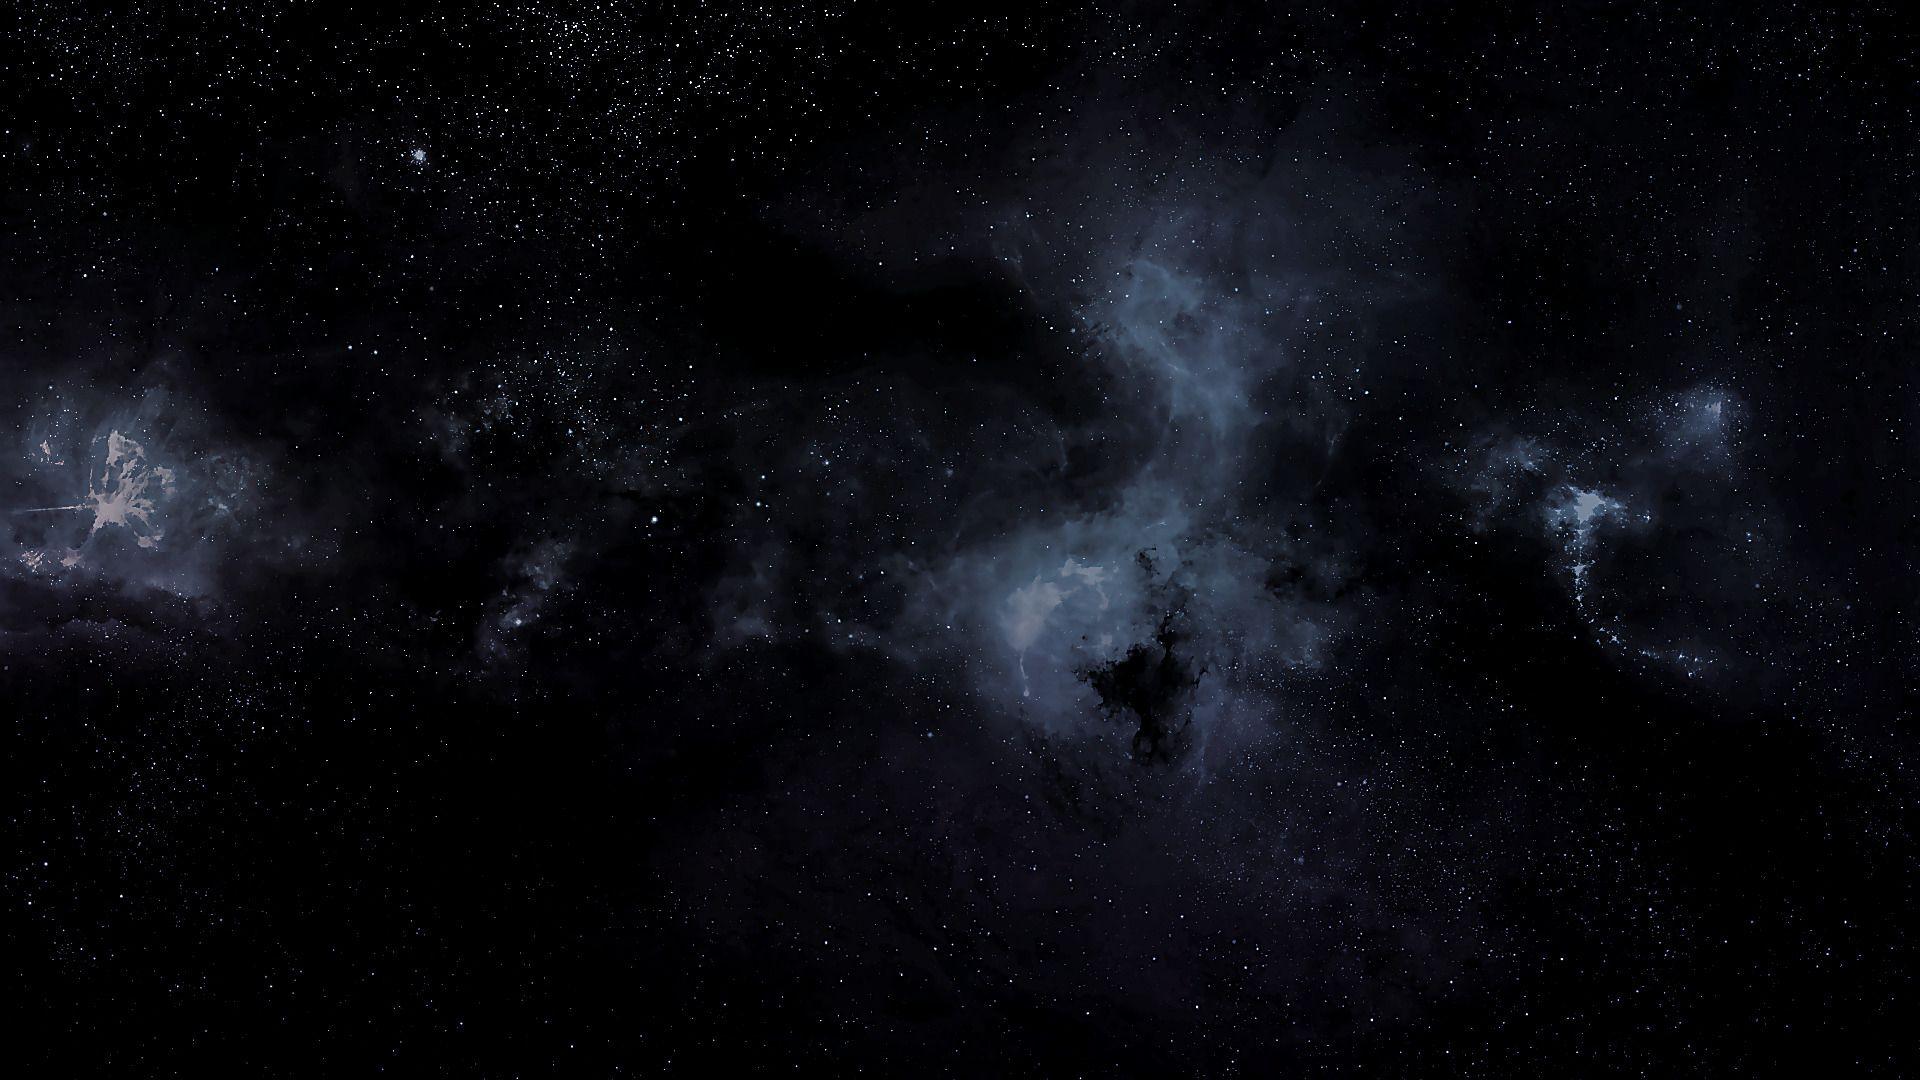 Dark Space Wallpaper 4K Laptop : Download, share or upload your own one!